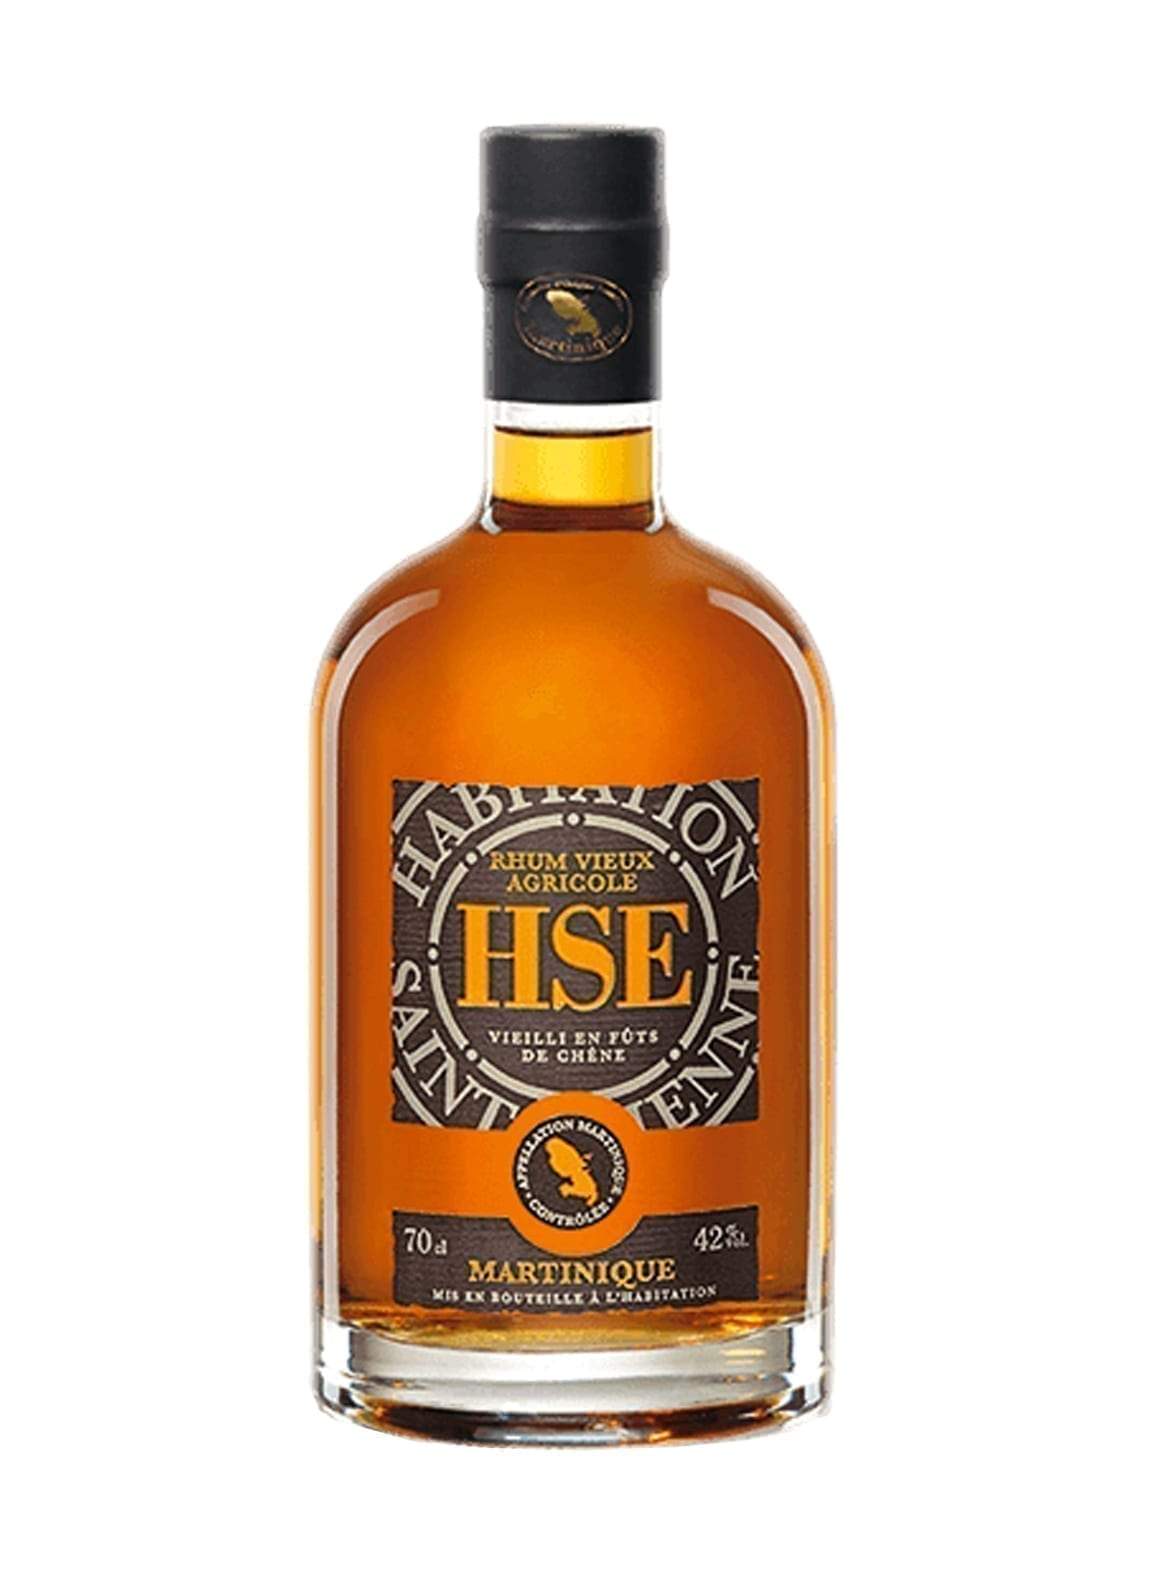 Habitation St Etienne Rum Agricole VO 4 years French Oak cask 42% 700ml | Rum | Shop online at Spirits of France